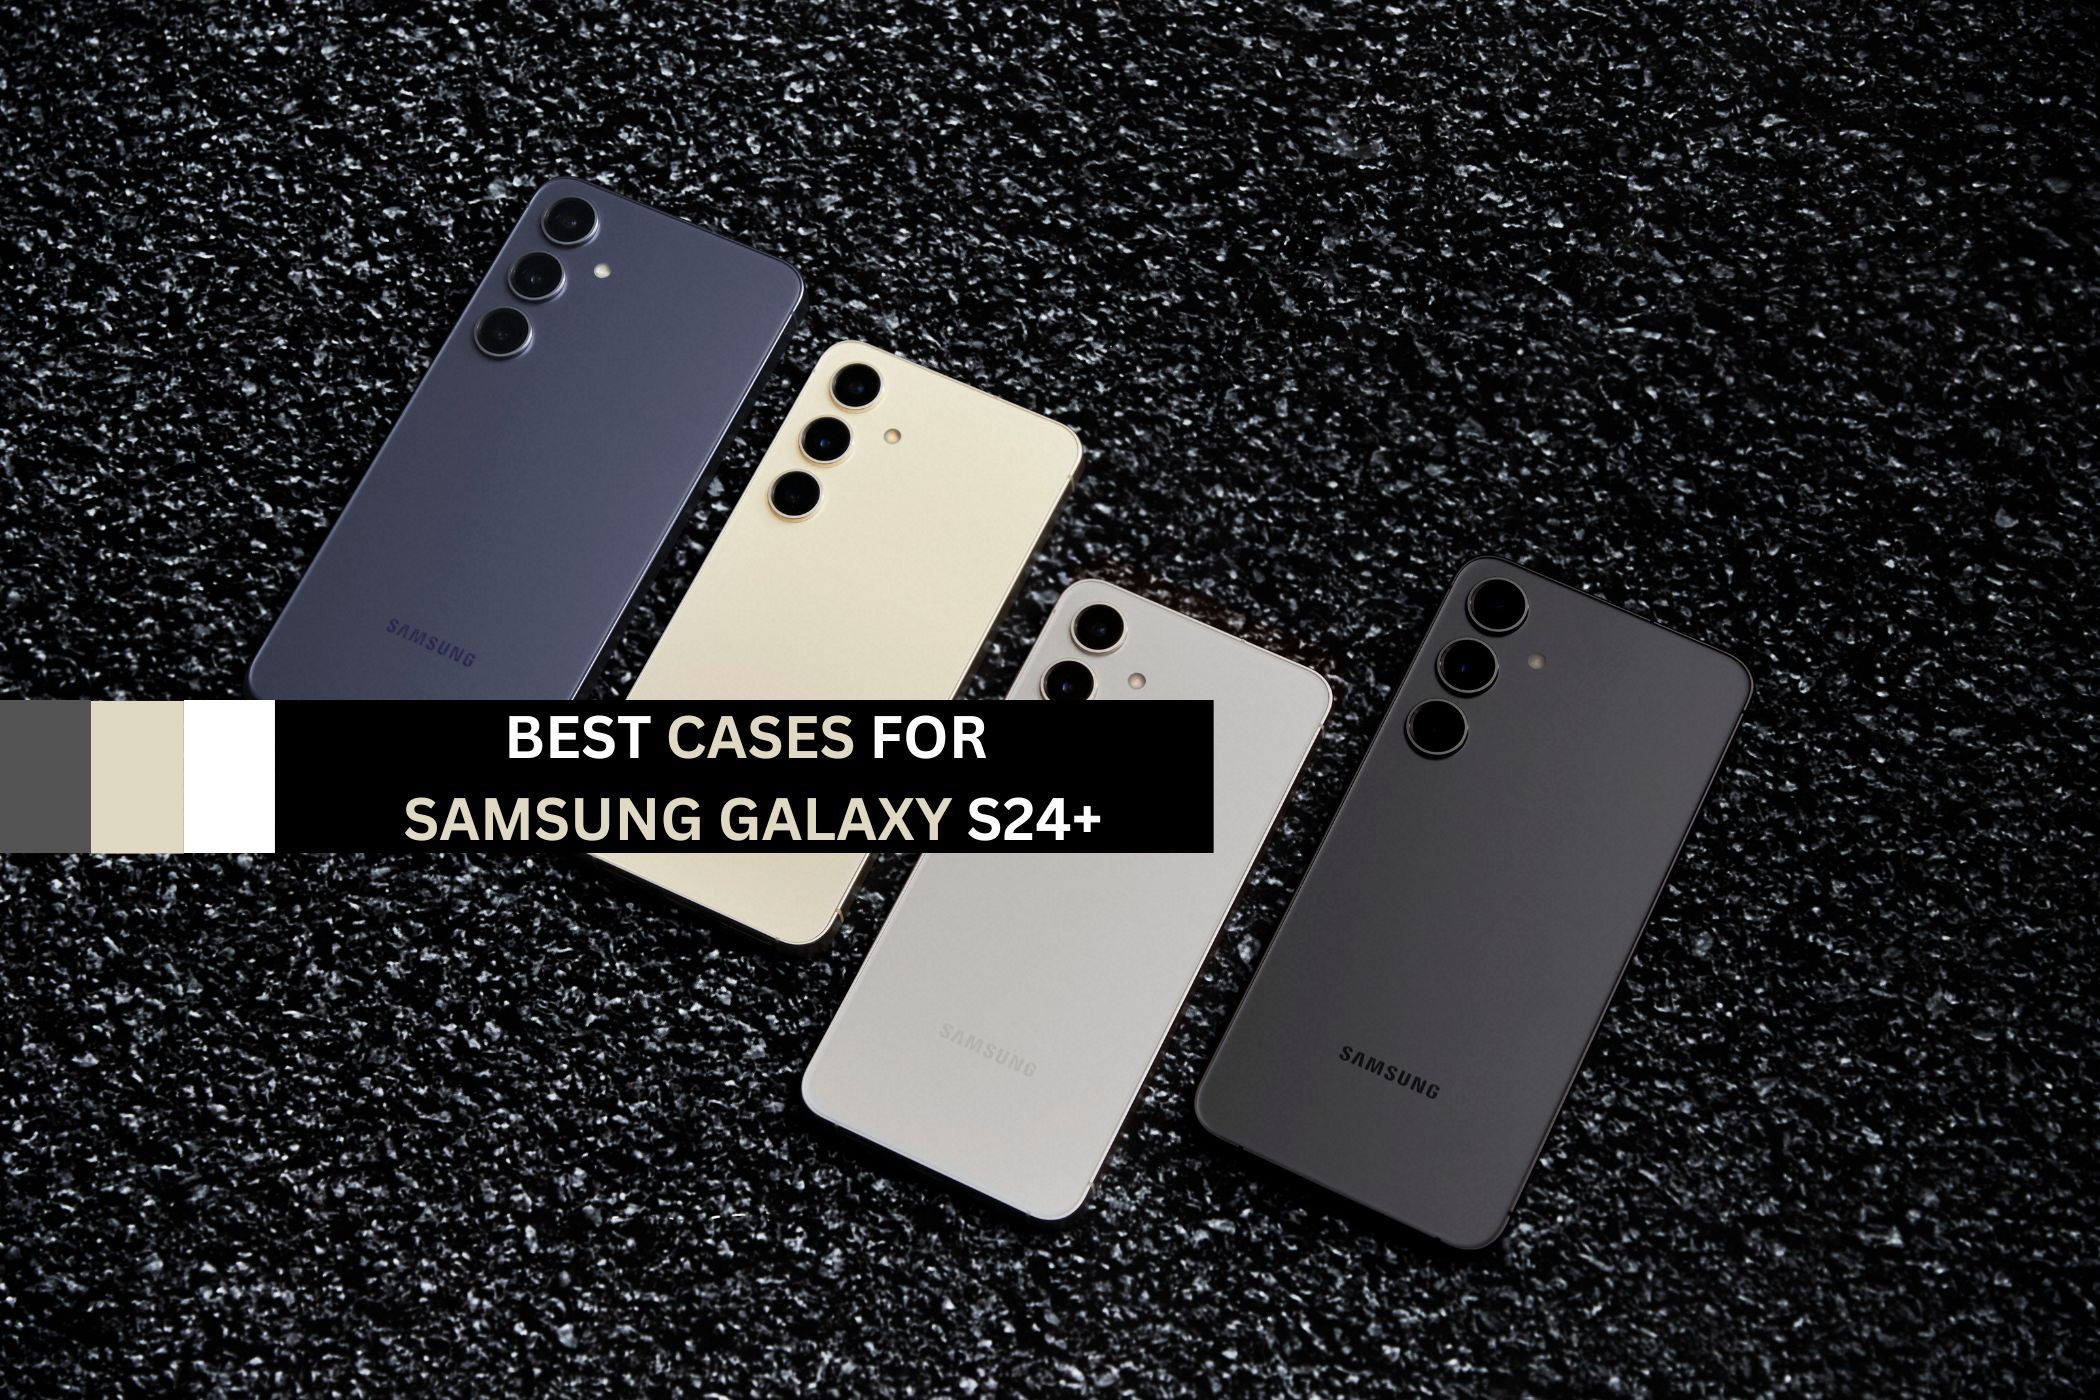 Best cases for Samsung Galaxy S24+